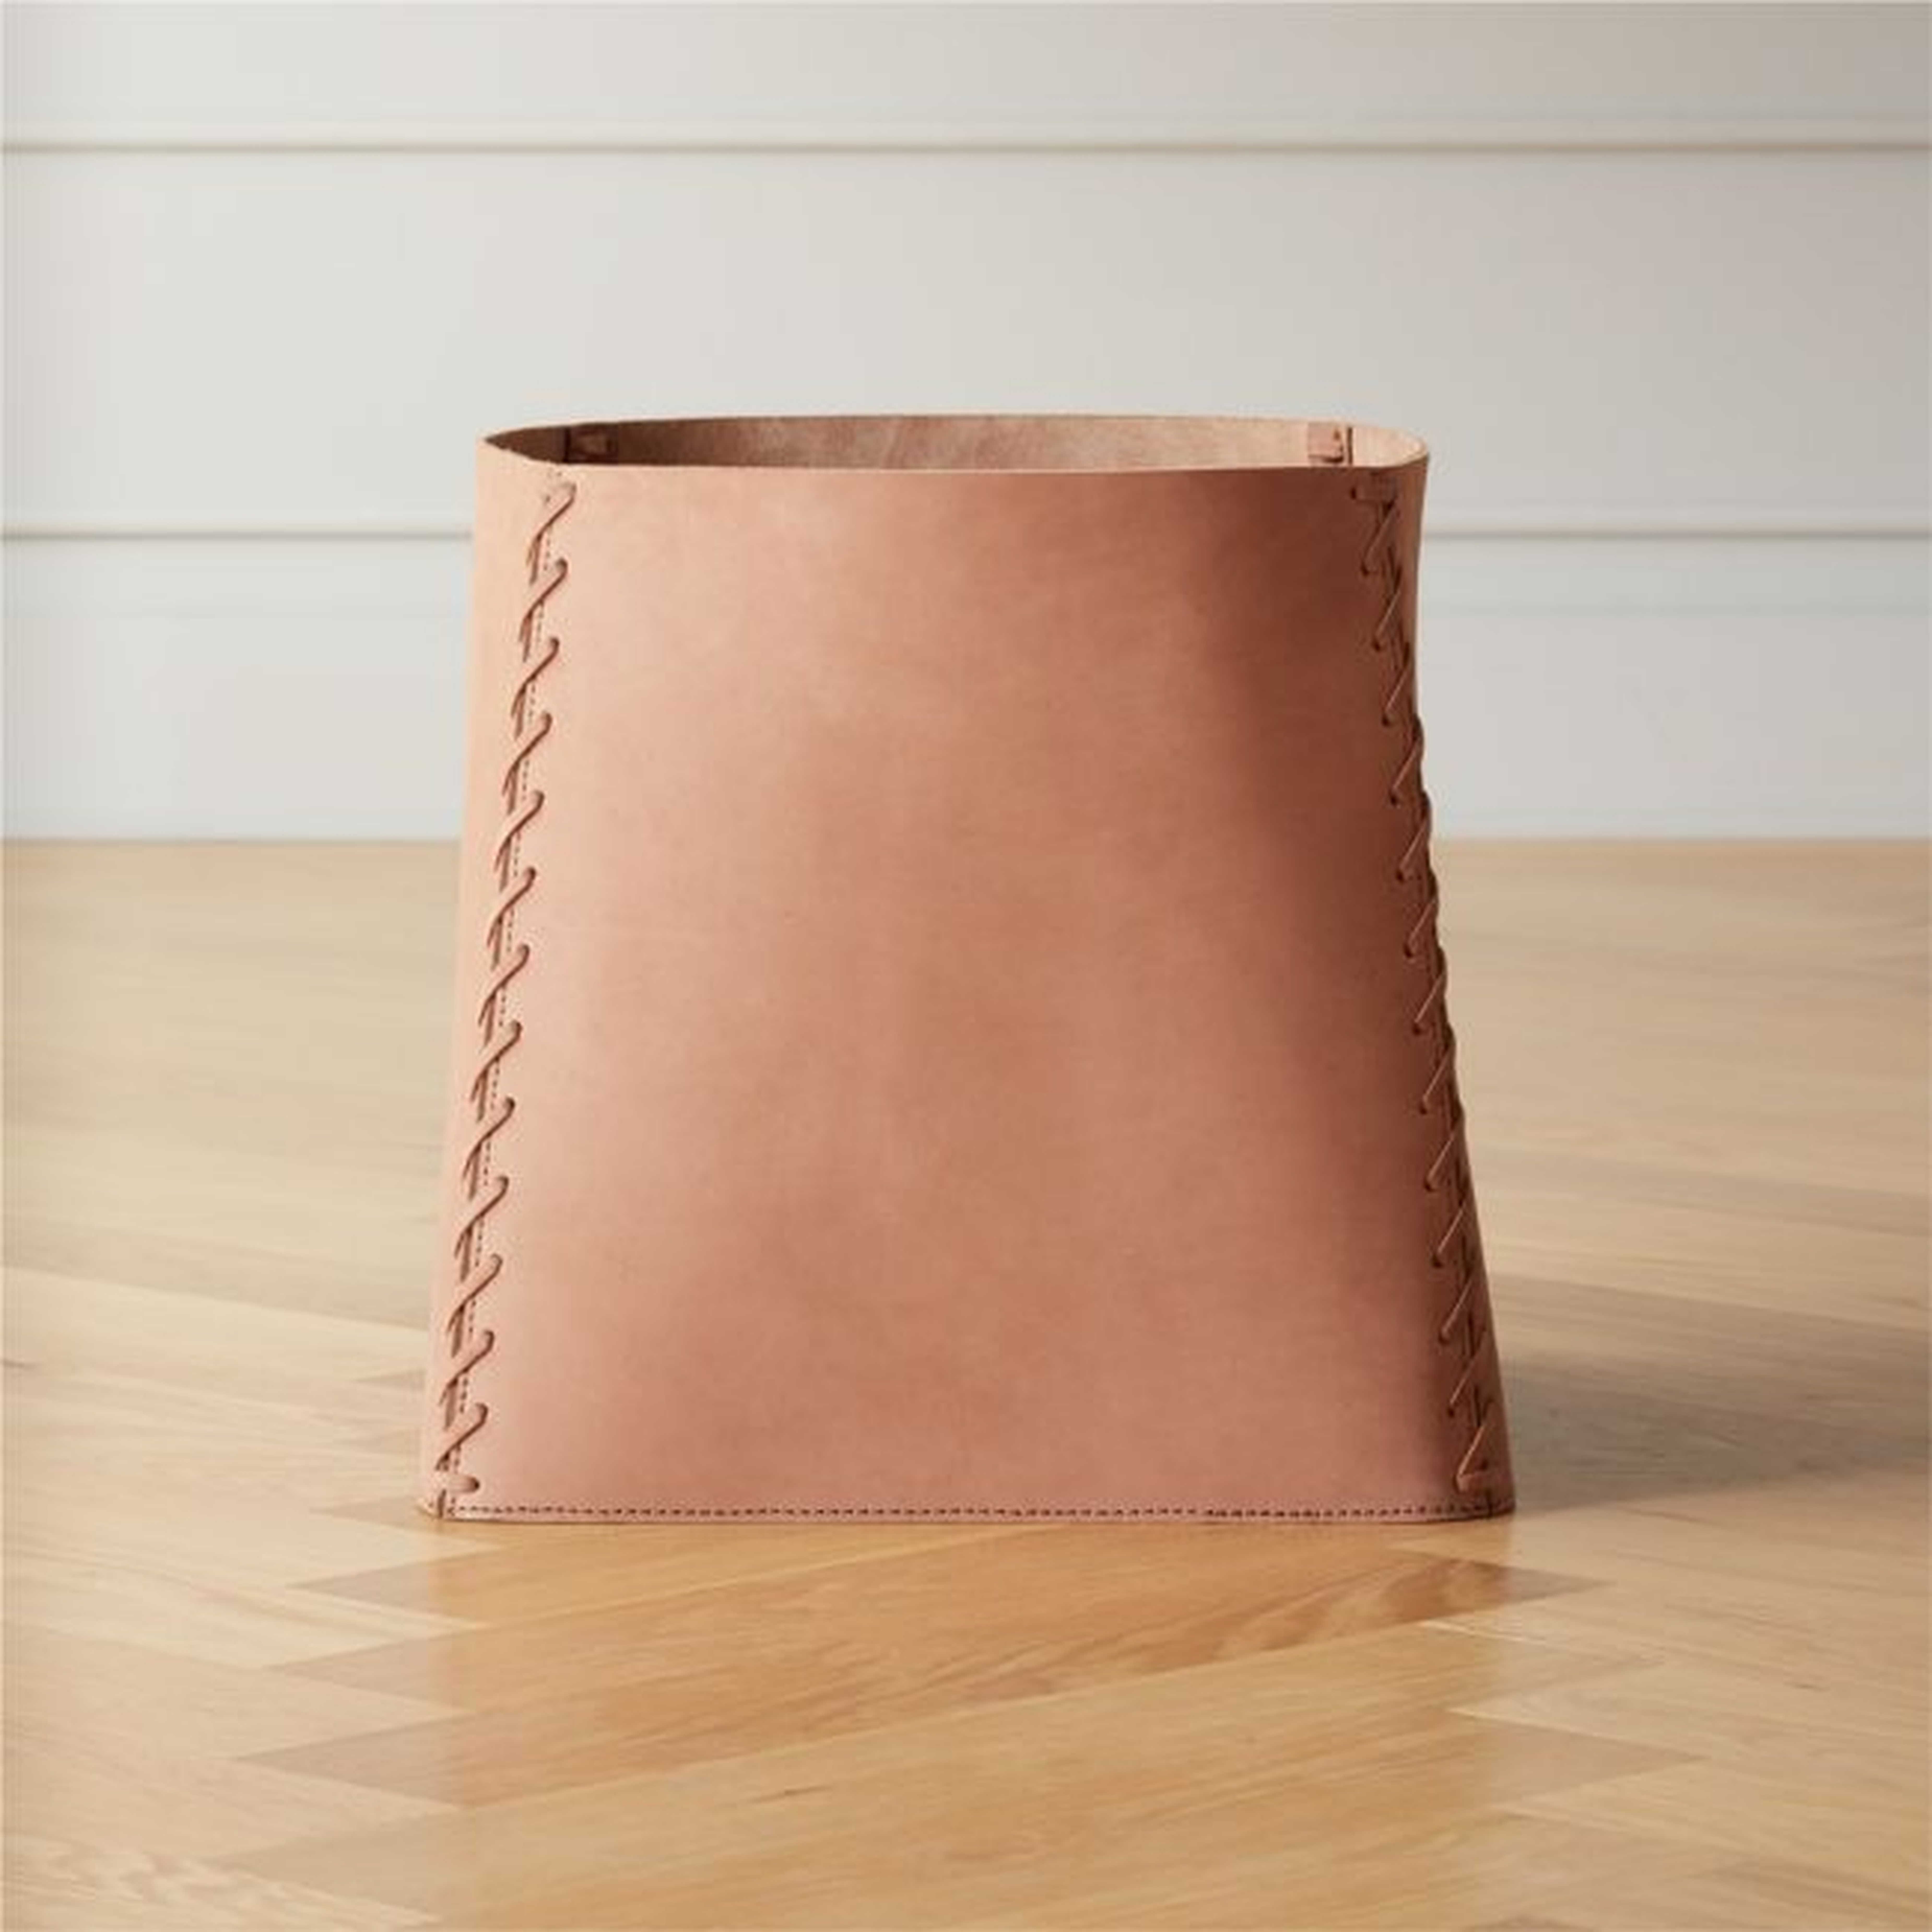 Rica Leather Basket Small - CB2